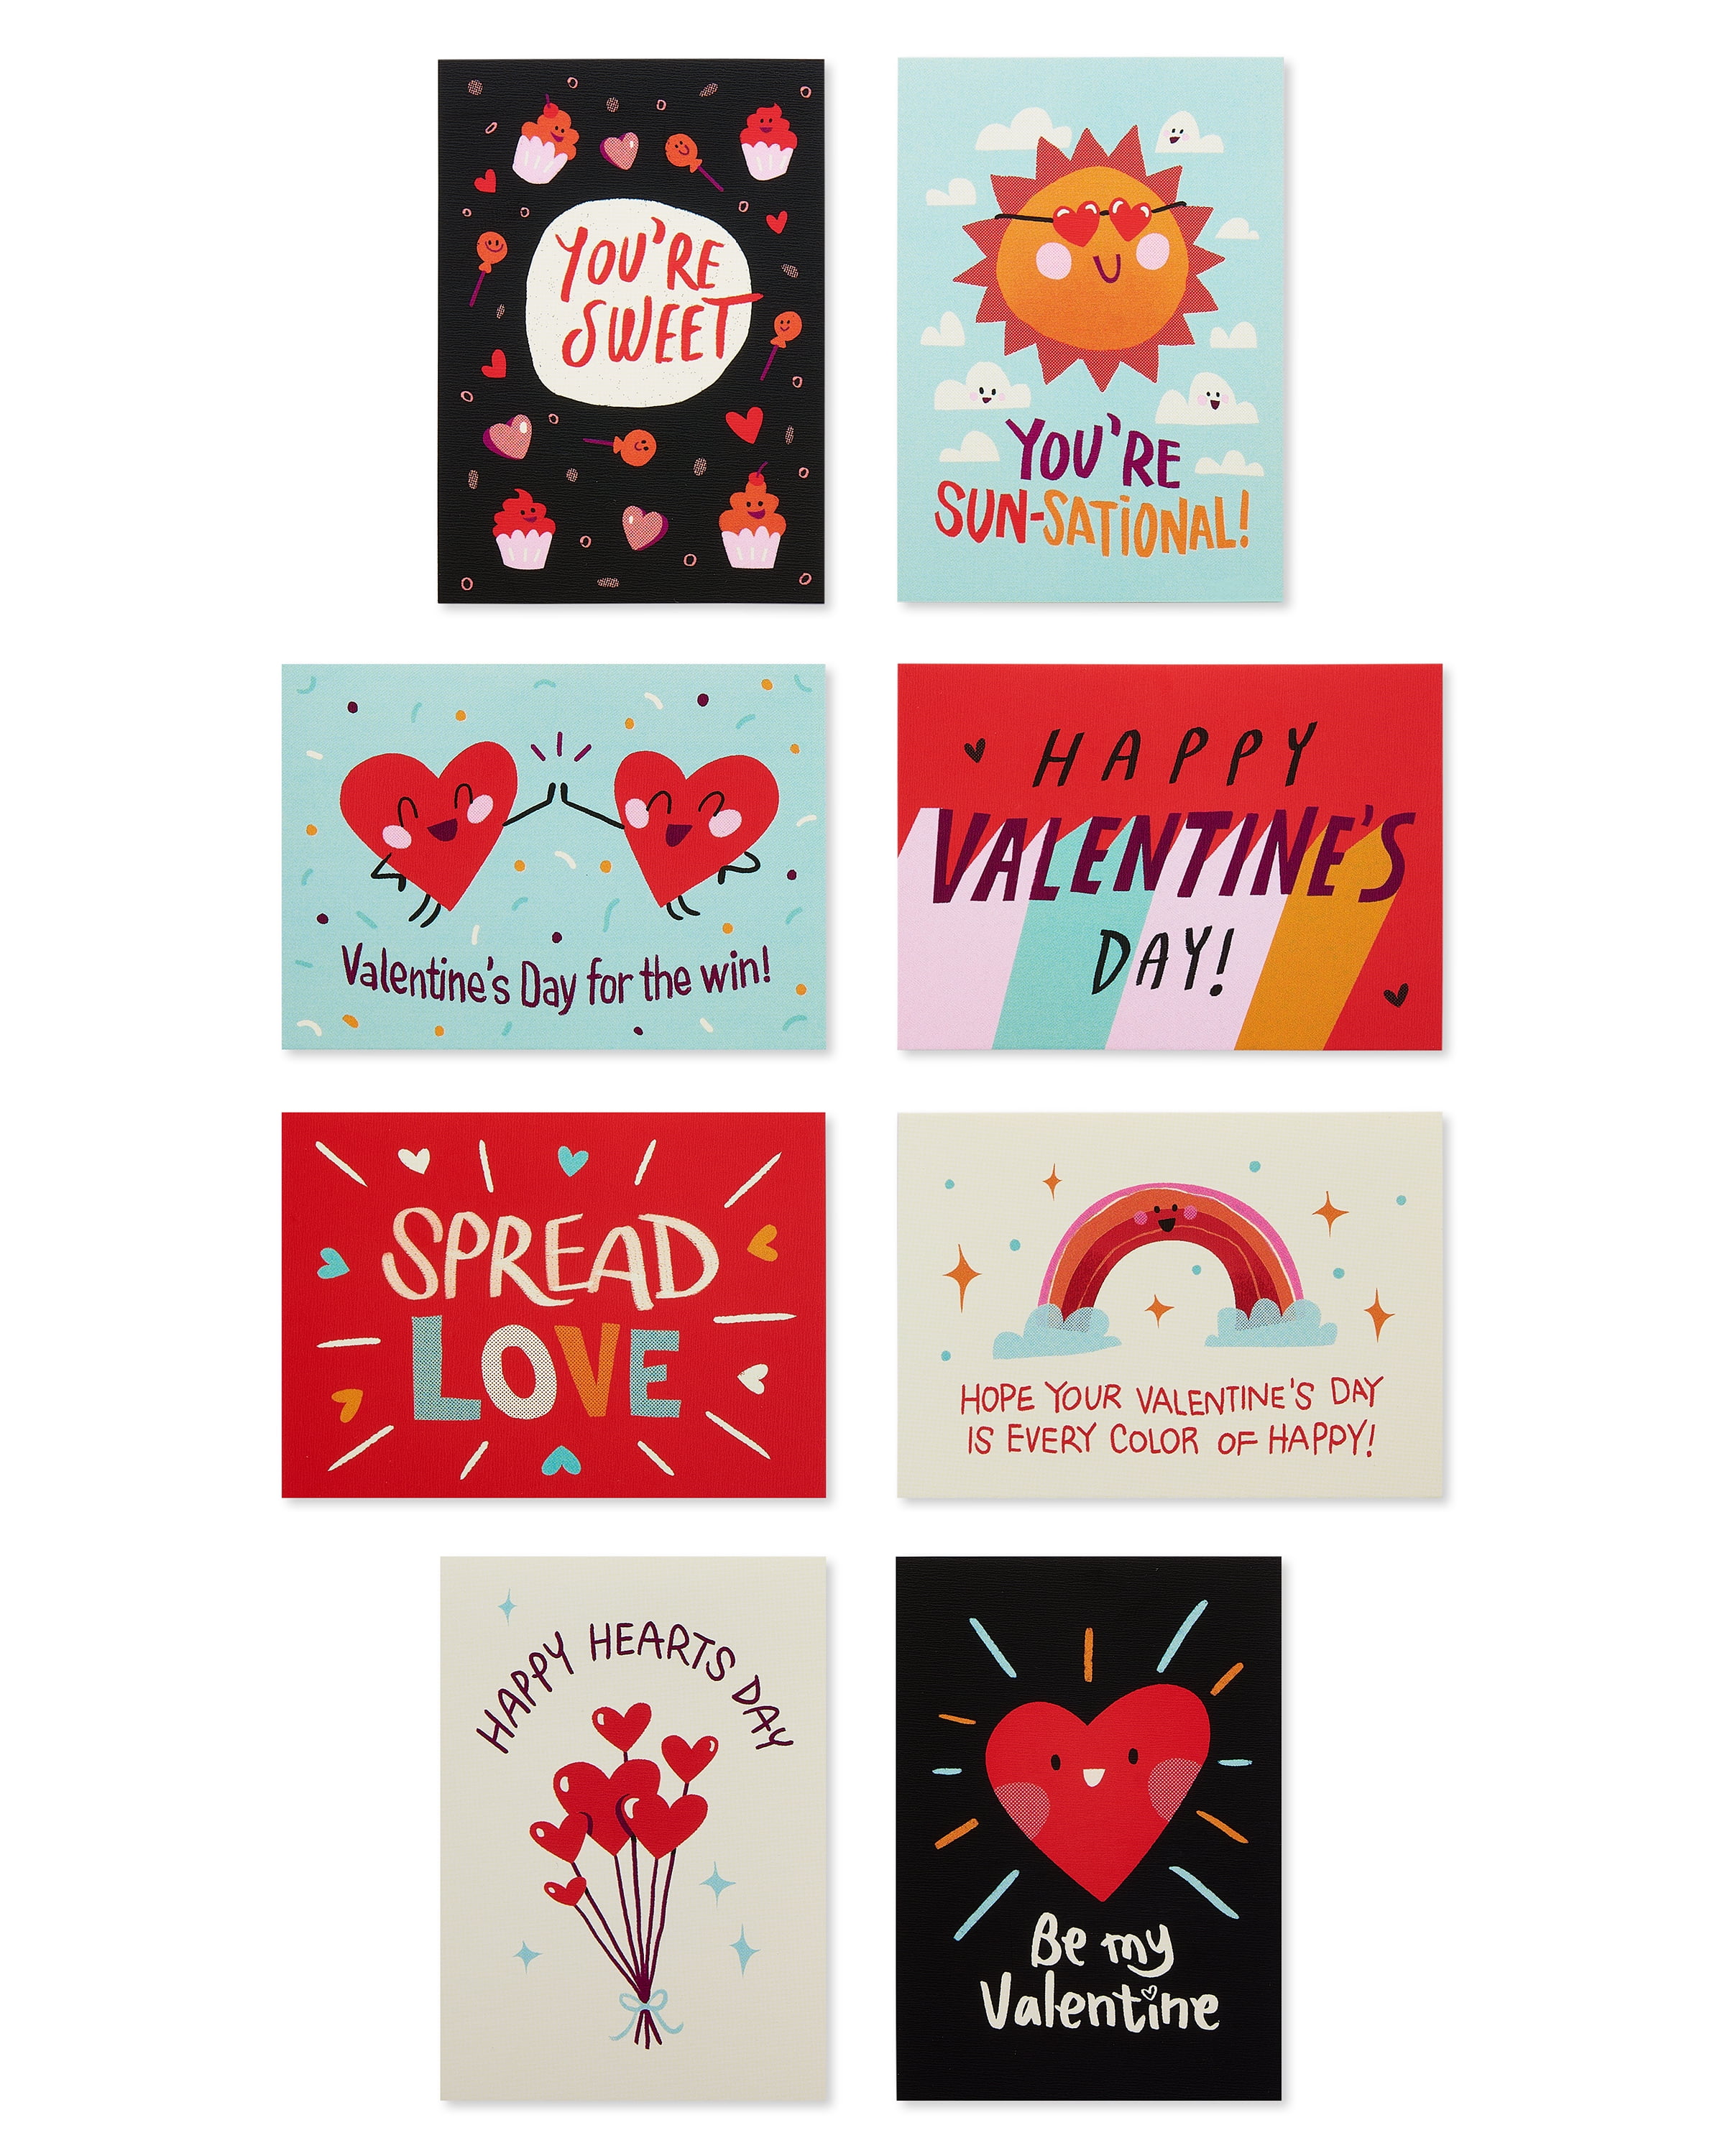 American Greetings Valentines Day Cards for Kids Classroom, Spread Love (40-Count)